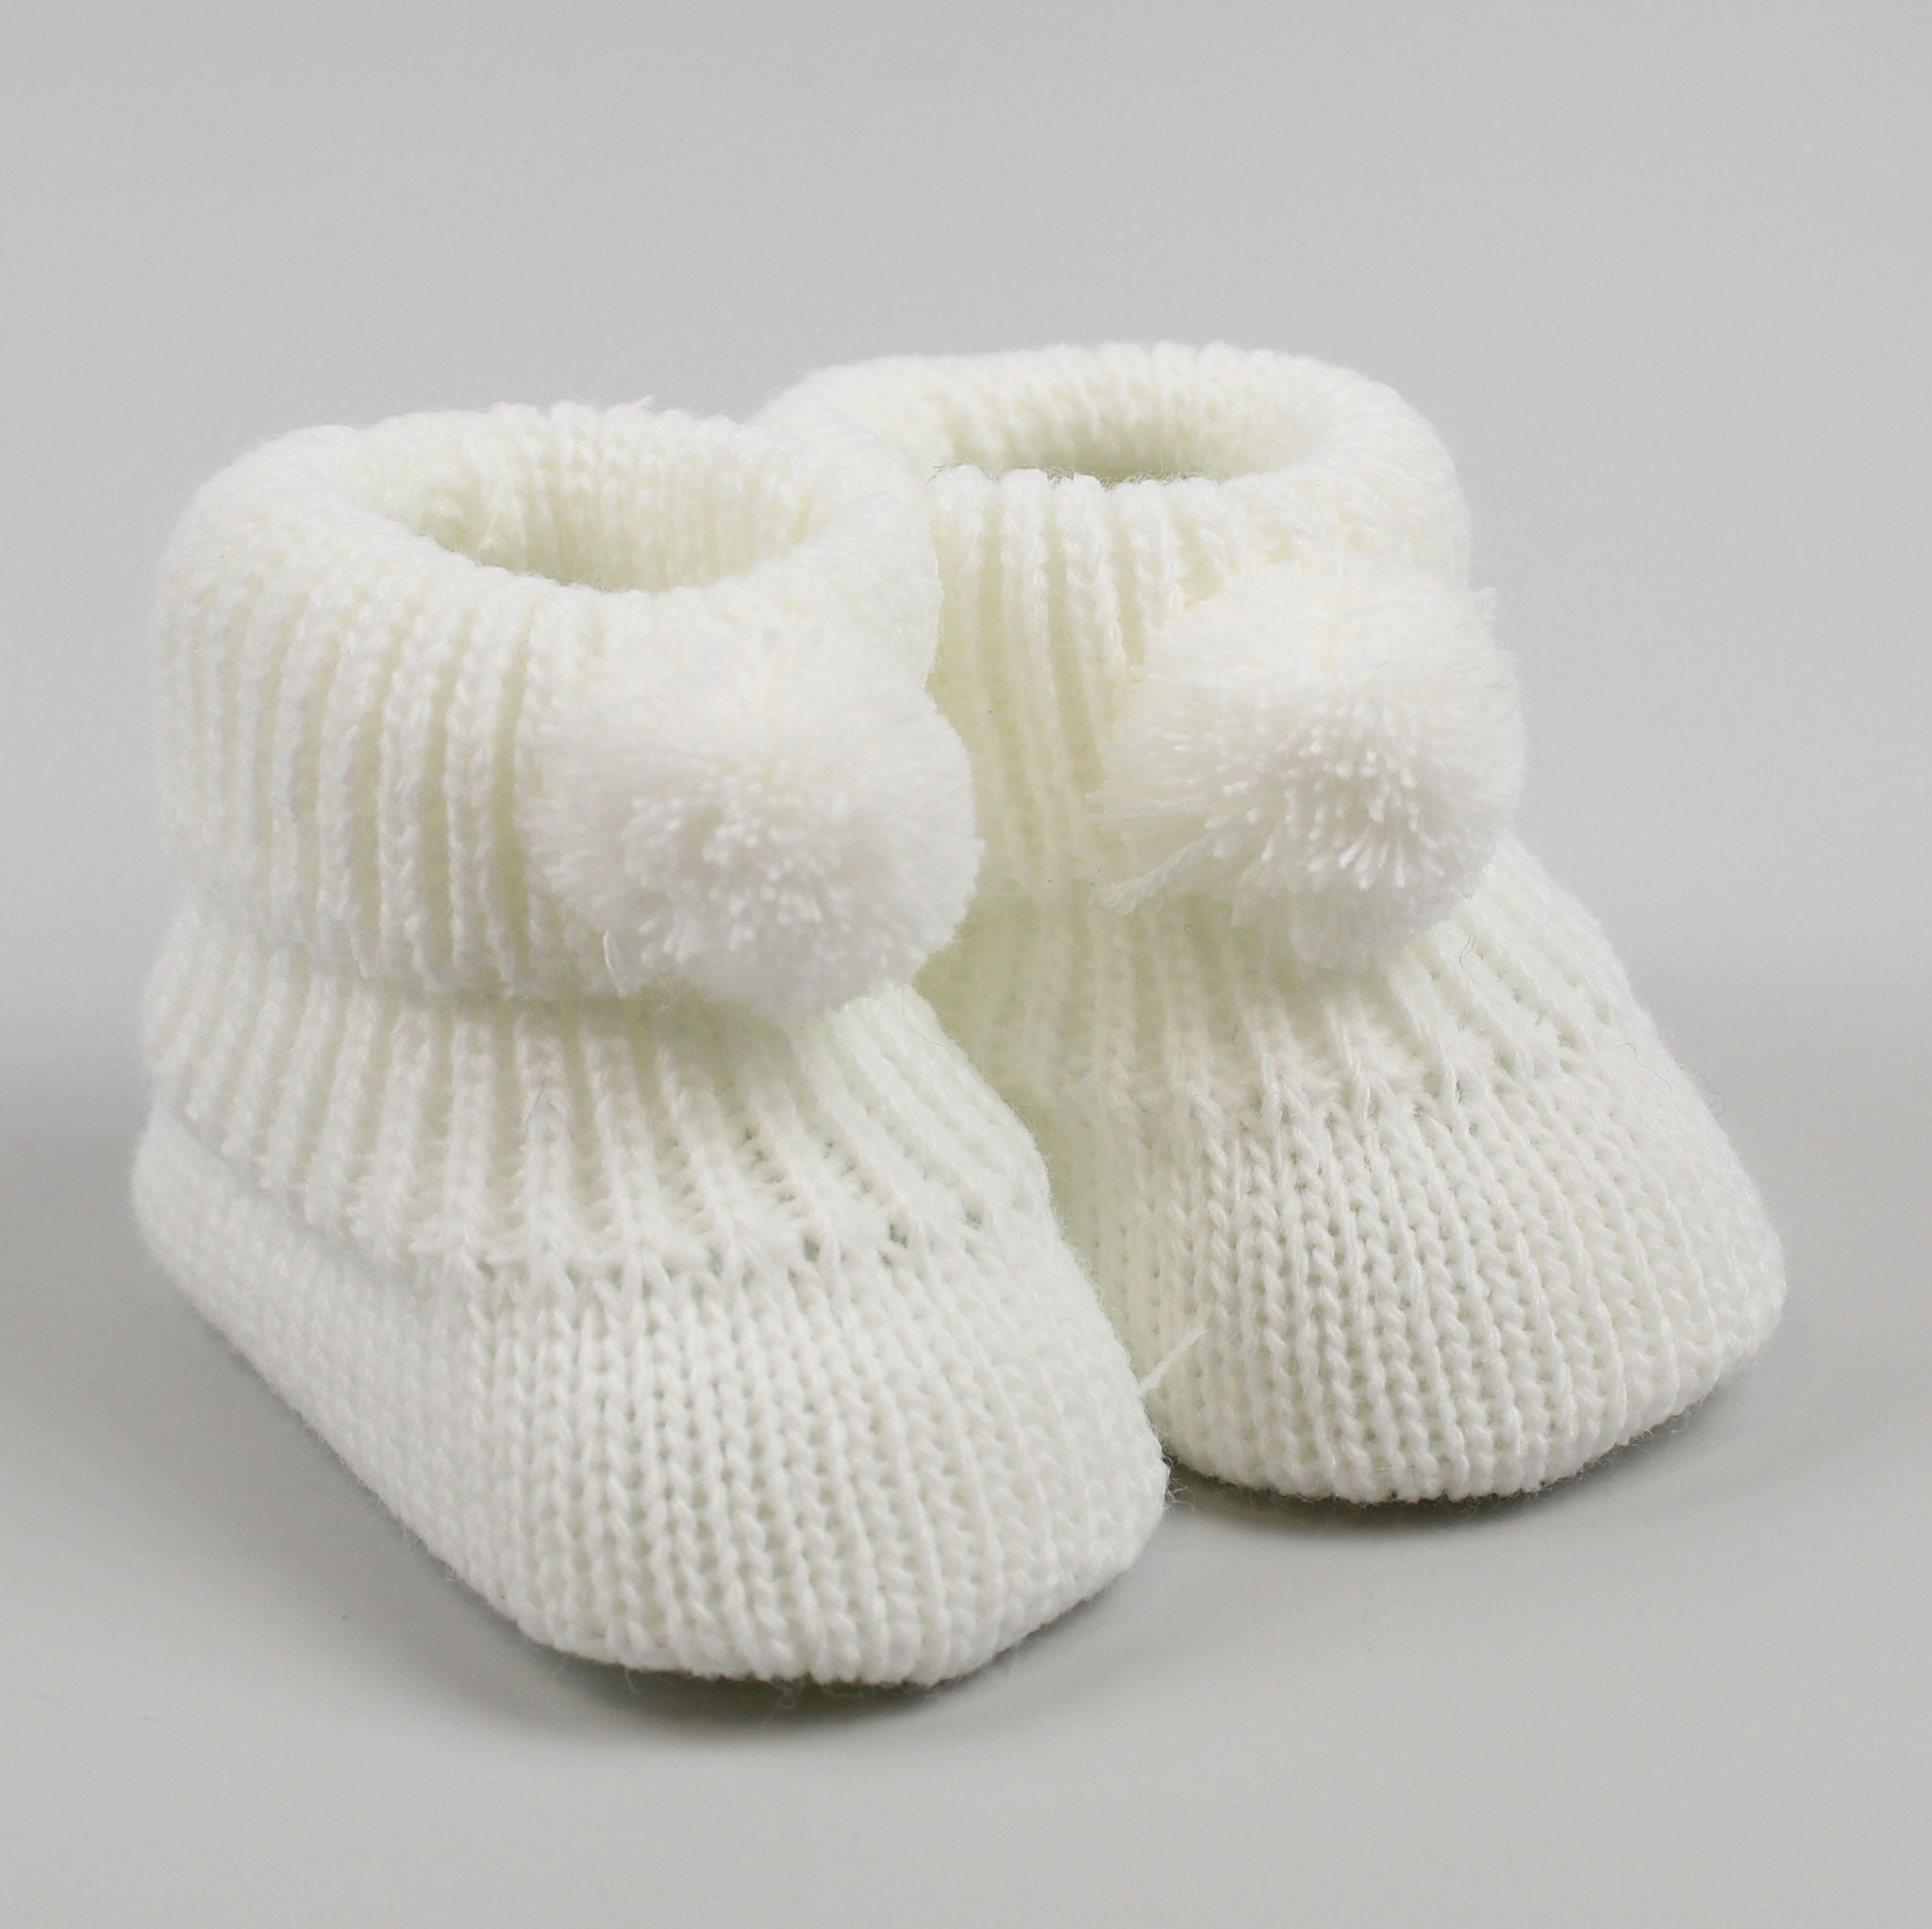 White Baby Booties with pom poms Newborn to 6 months